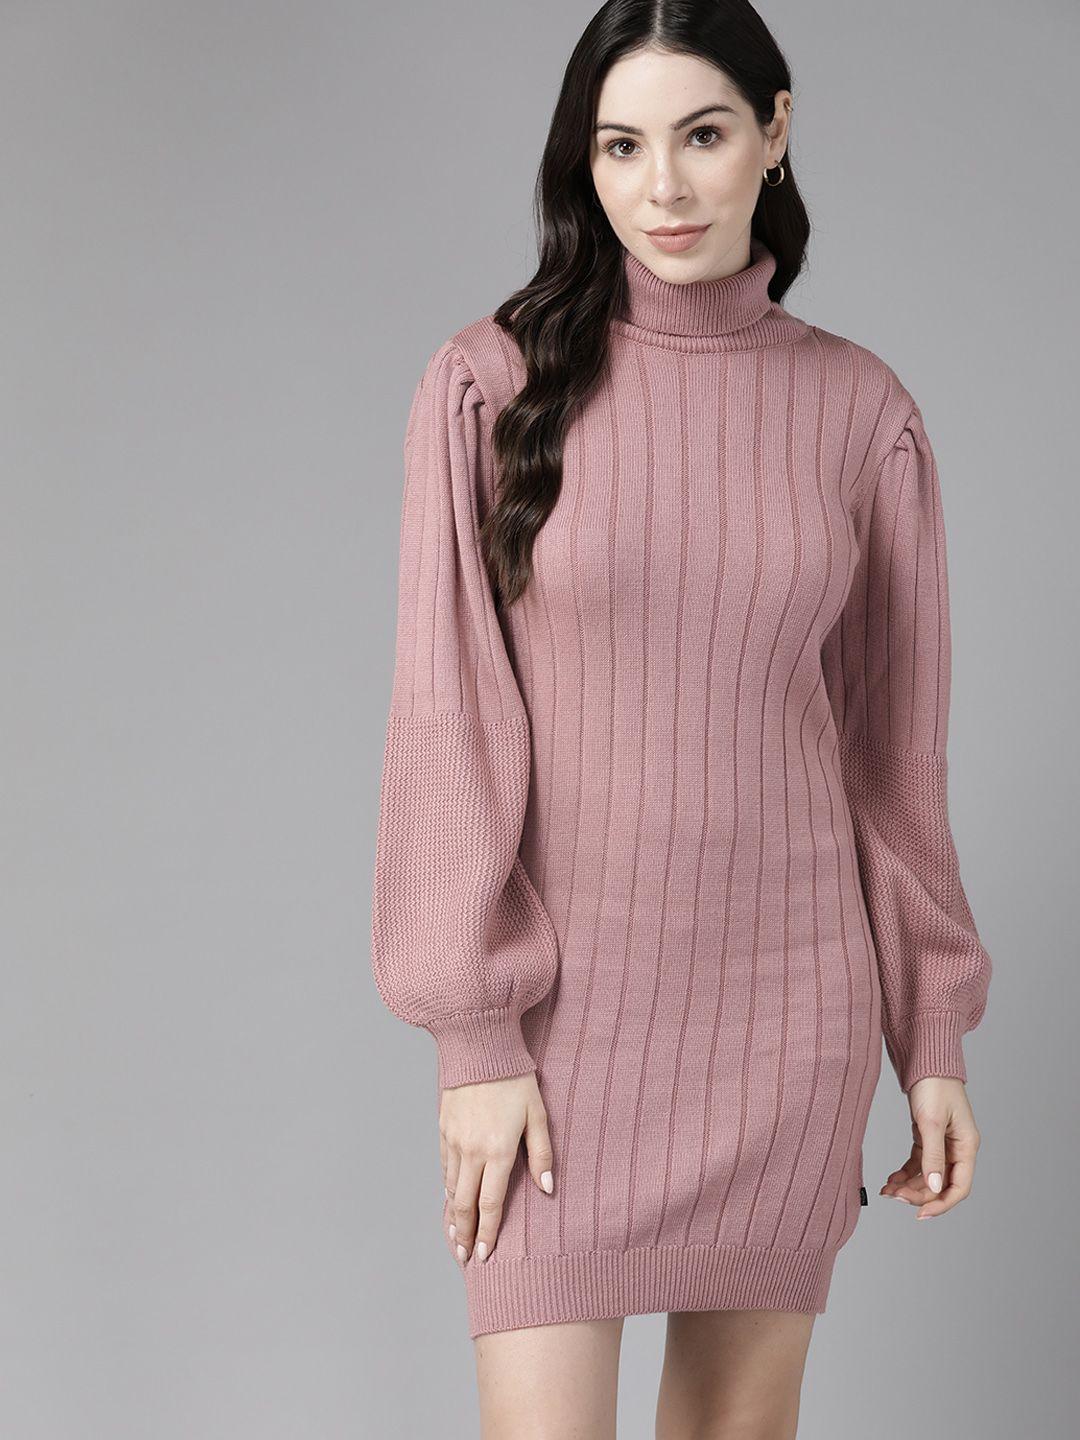 the roadster lifestyle co. turtle neck puff sleeves ribbed acrylic jumper dress